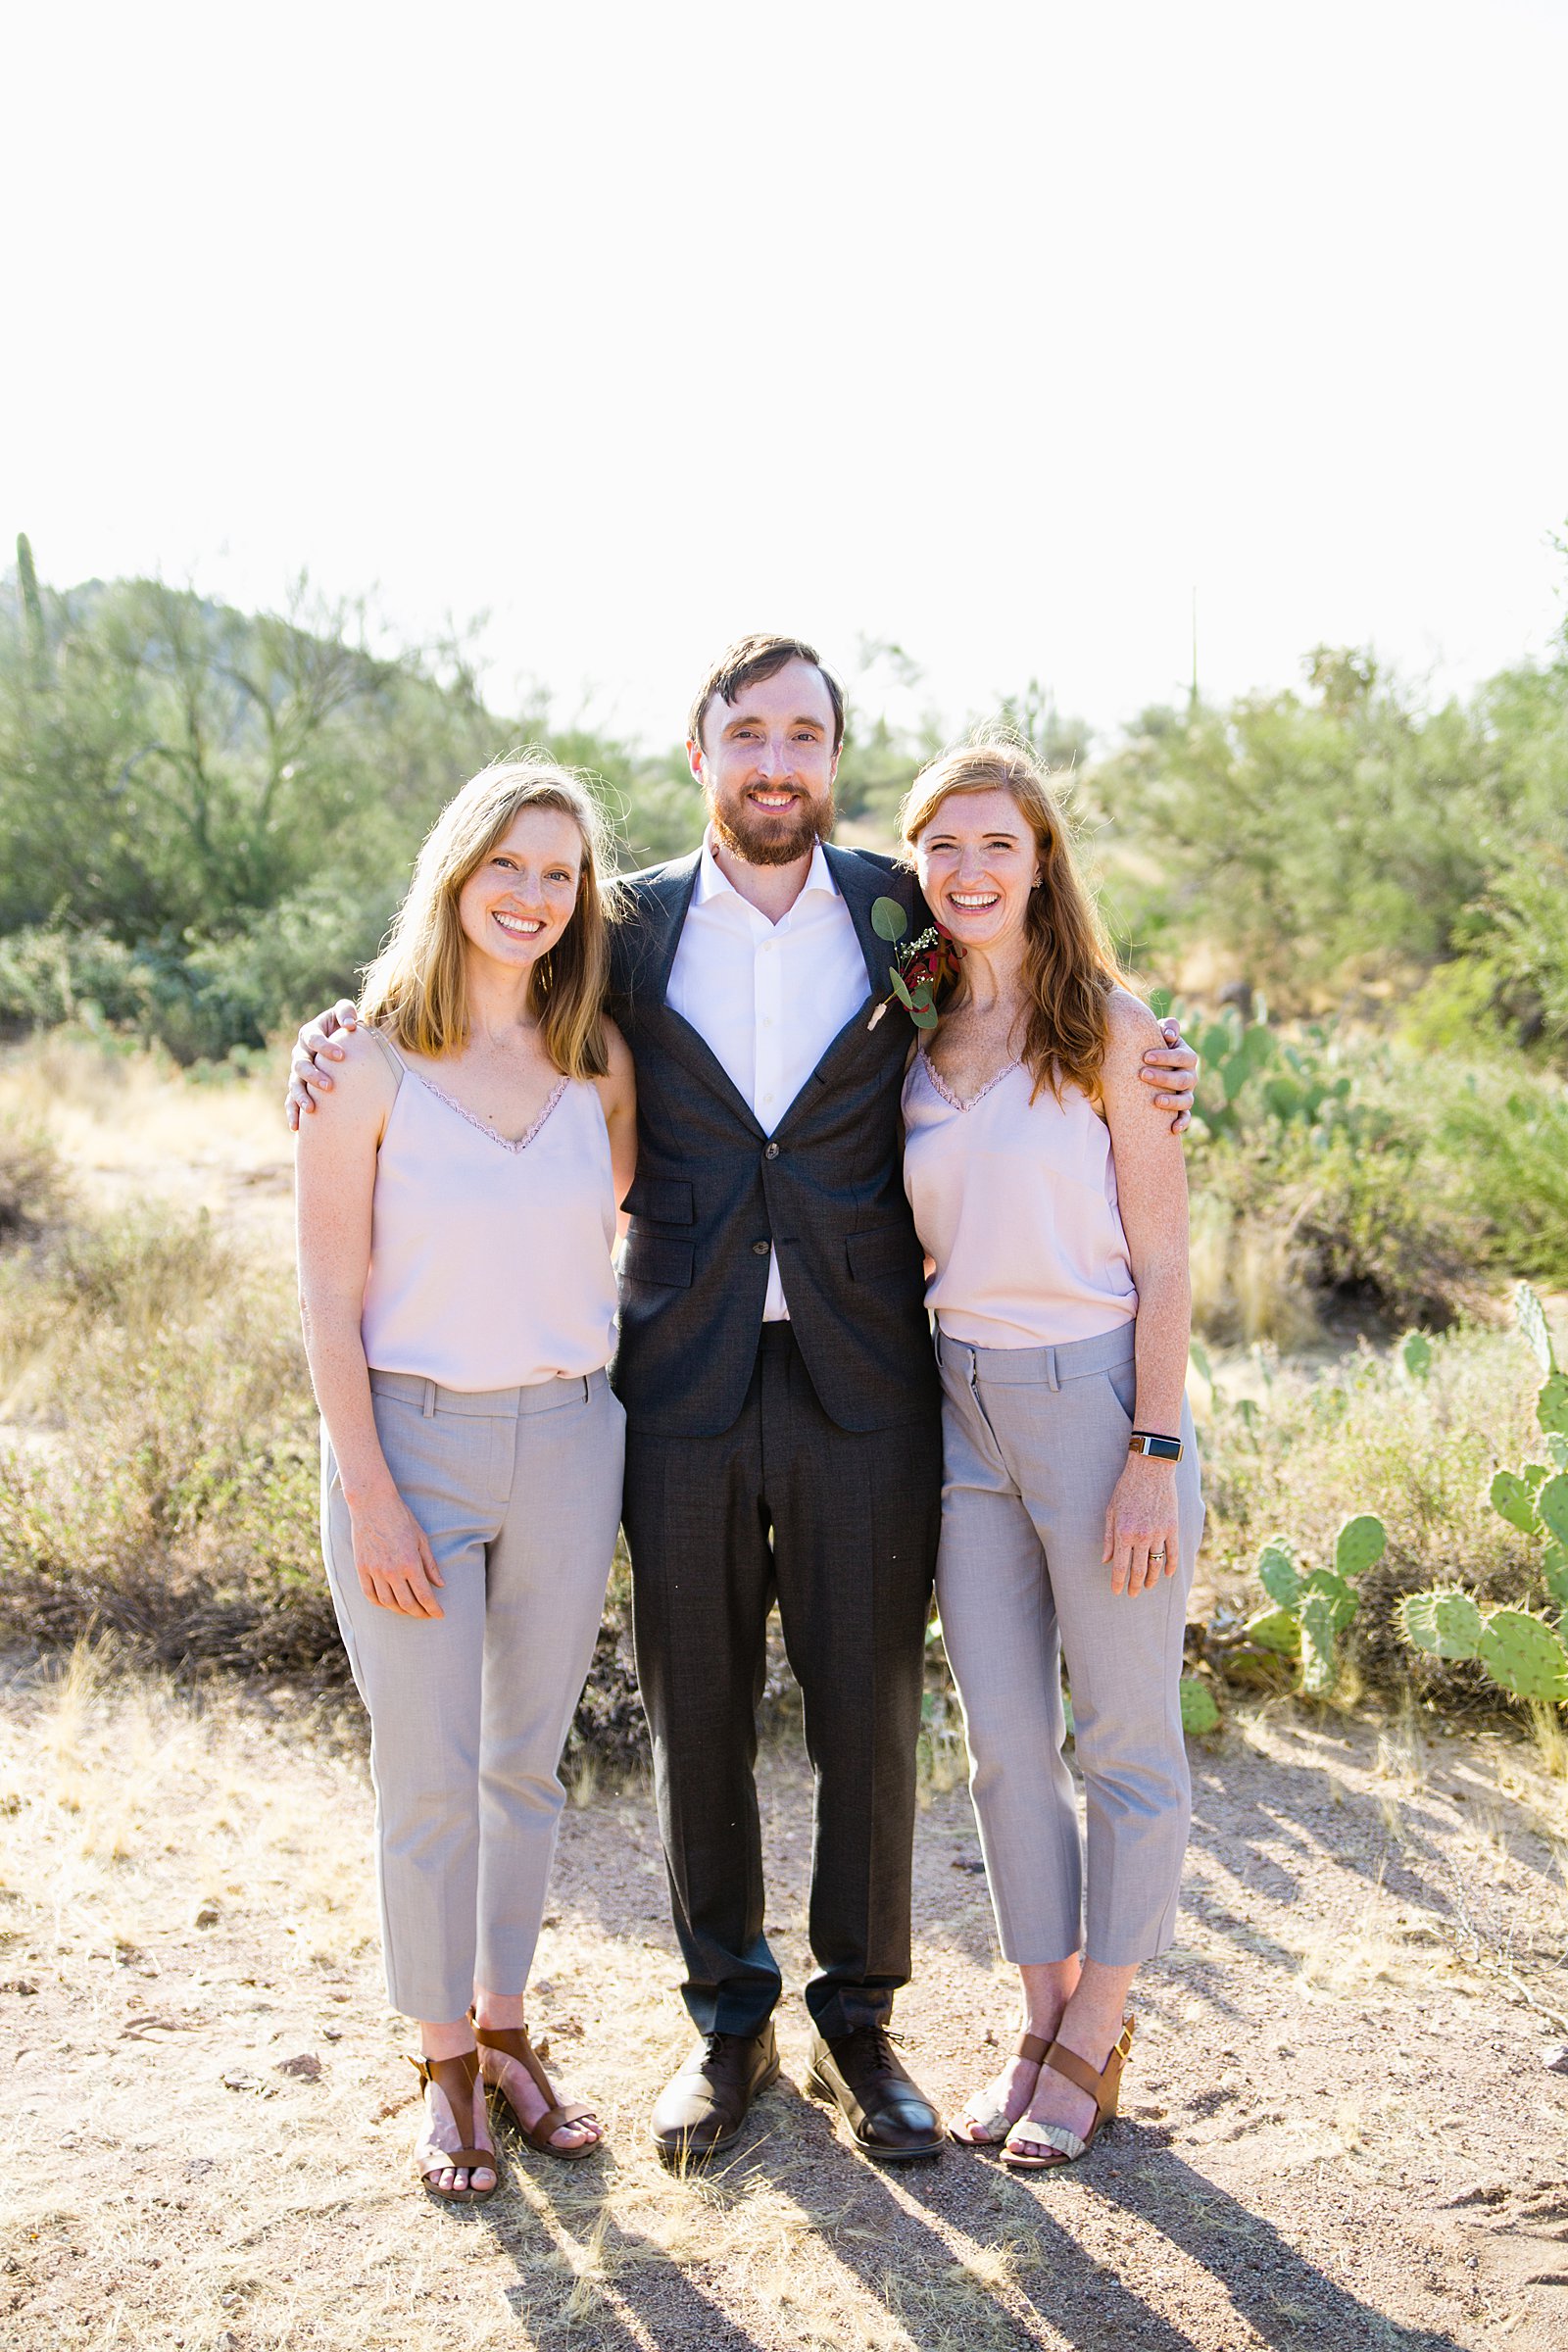 Groom and mixed gender bridal party together at a Cloth and Flame Superstition Mountain wedding by Arizona wedding photographer PMA Photography.